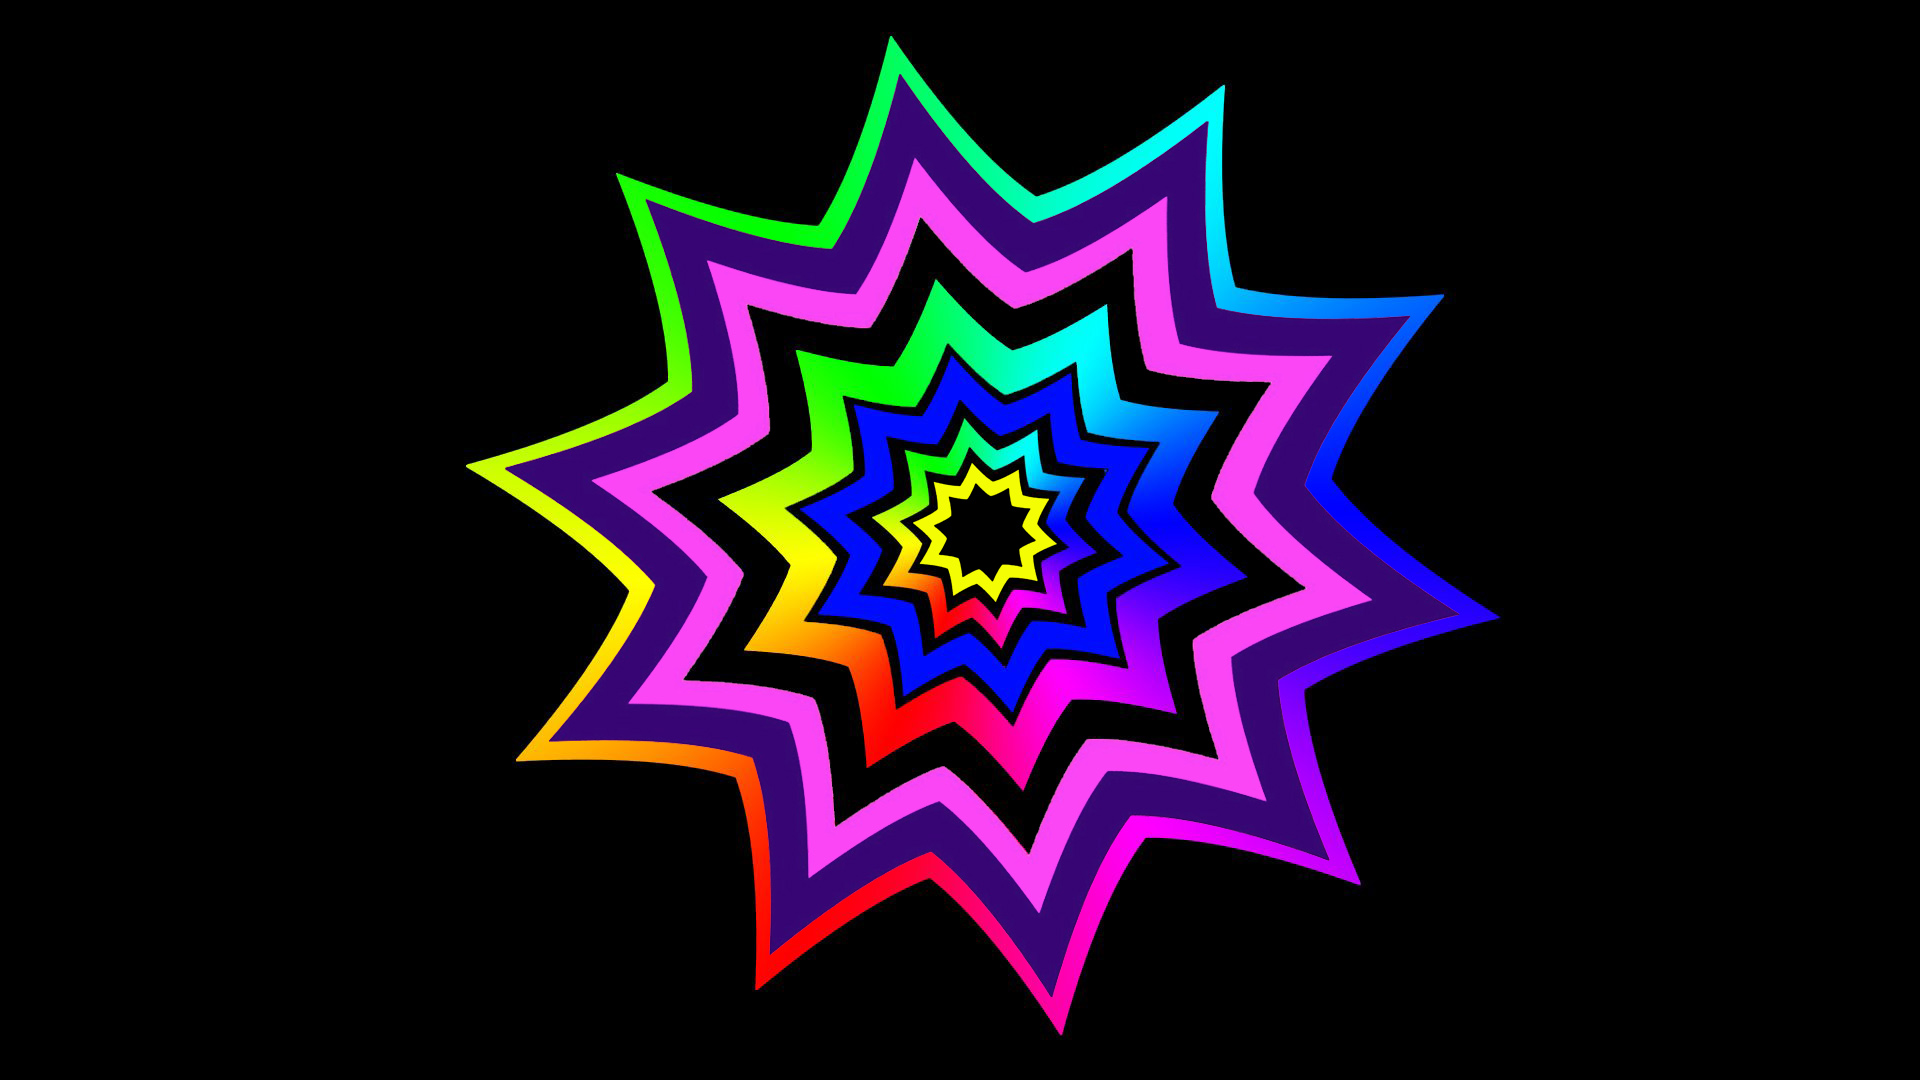 Abstract Colorful Digital Art Geometry Shapes Star 1920x1080